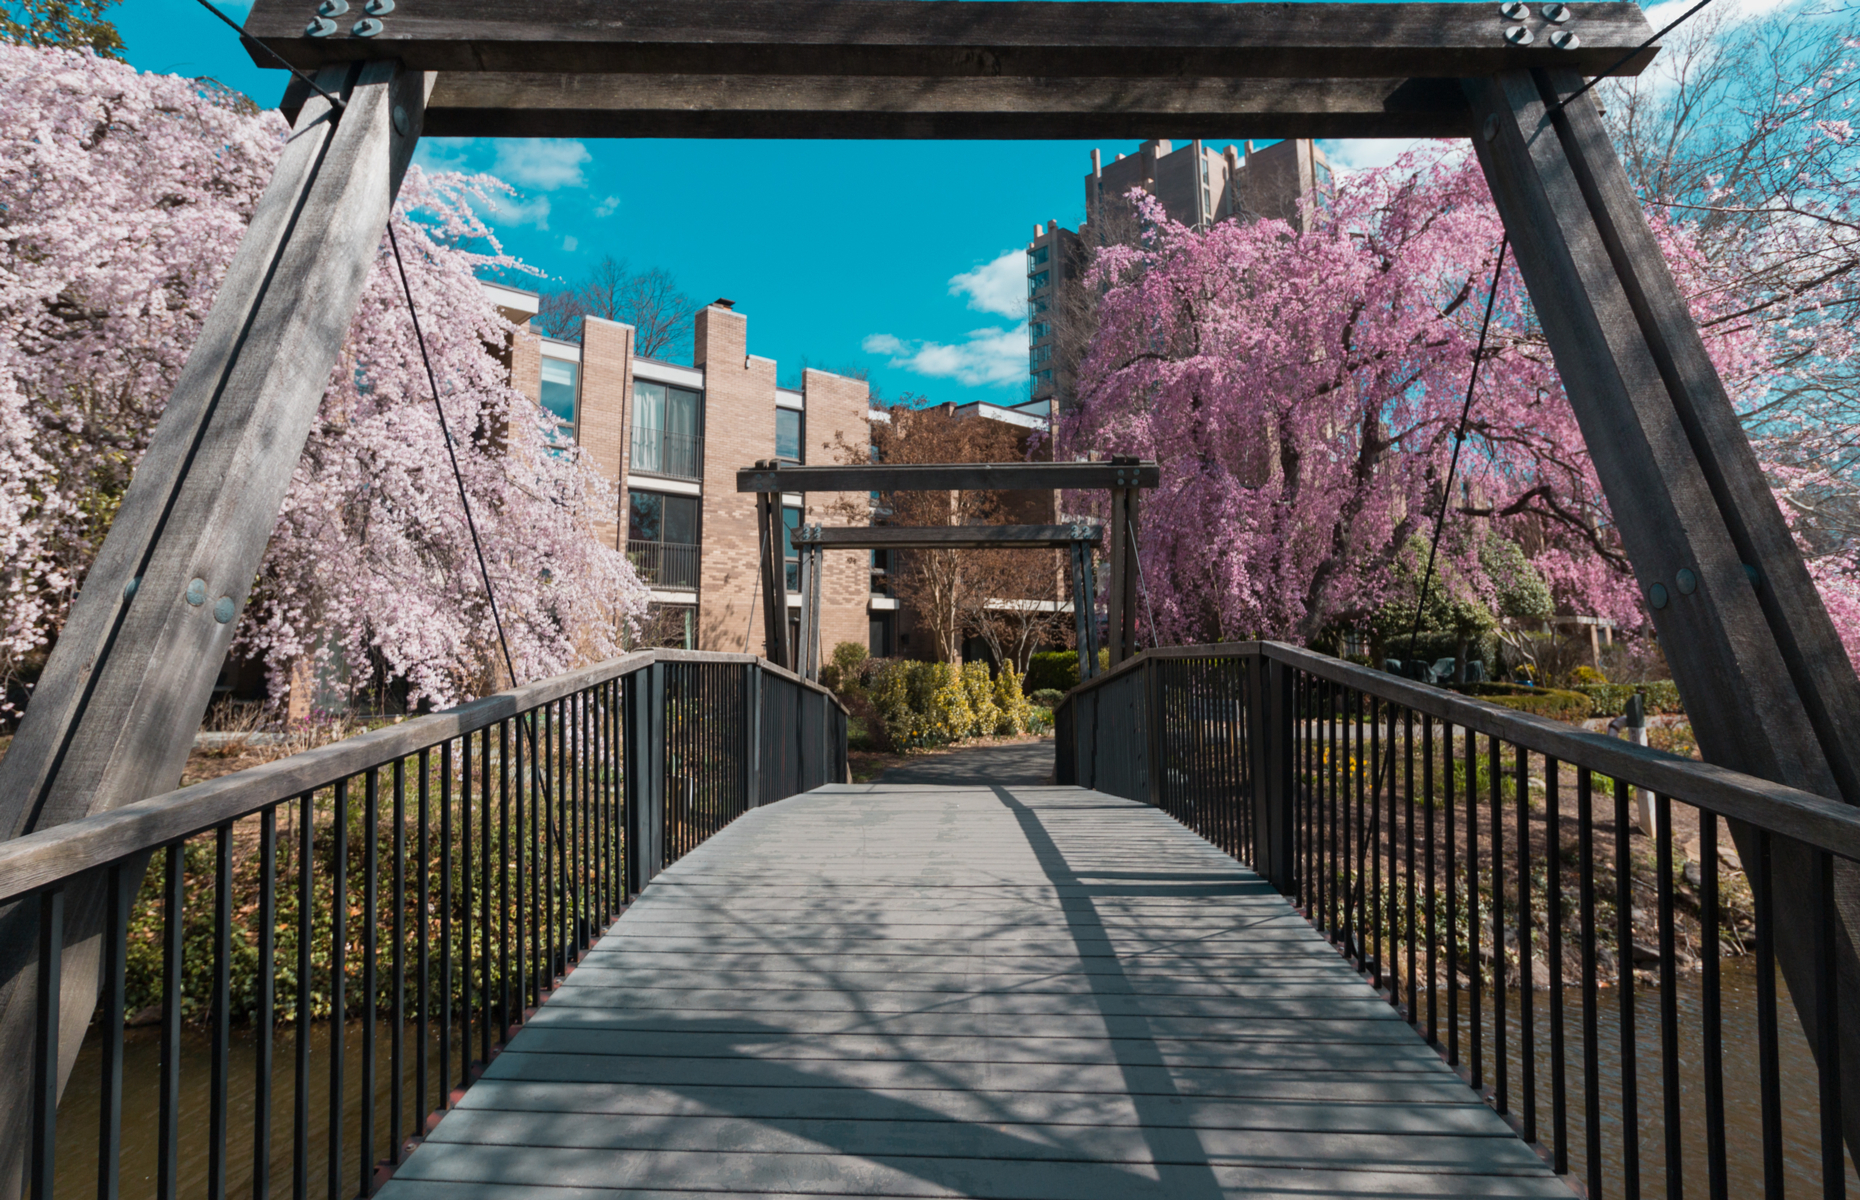 <p class="p1"><span>When the Lake Anne Plaza opened in 1966, it drew comparisons to the Piazza San Marco in Venice—and it’s easy to see why. The village’s main attraction is the <a href="https://www.funinfairfaxva.com/van-gogh-bridge-reston-virginia/" rel="noreferrer noopener"><span>Van Gogh Bridge</span></a> connecting the businesses to the residences of Washington Plaza, and described as “both infrastructure and art.”</span></p>